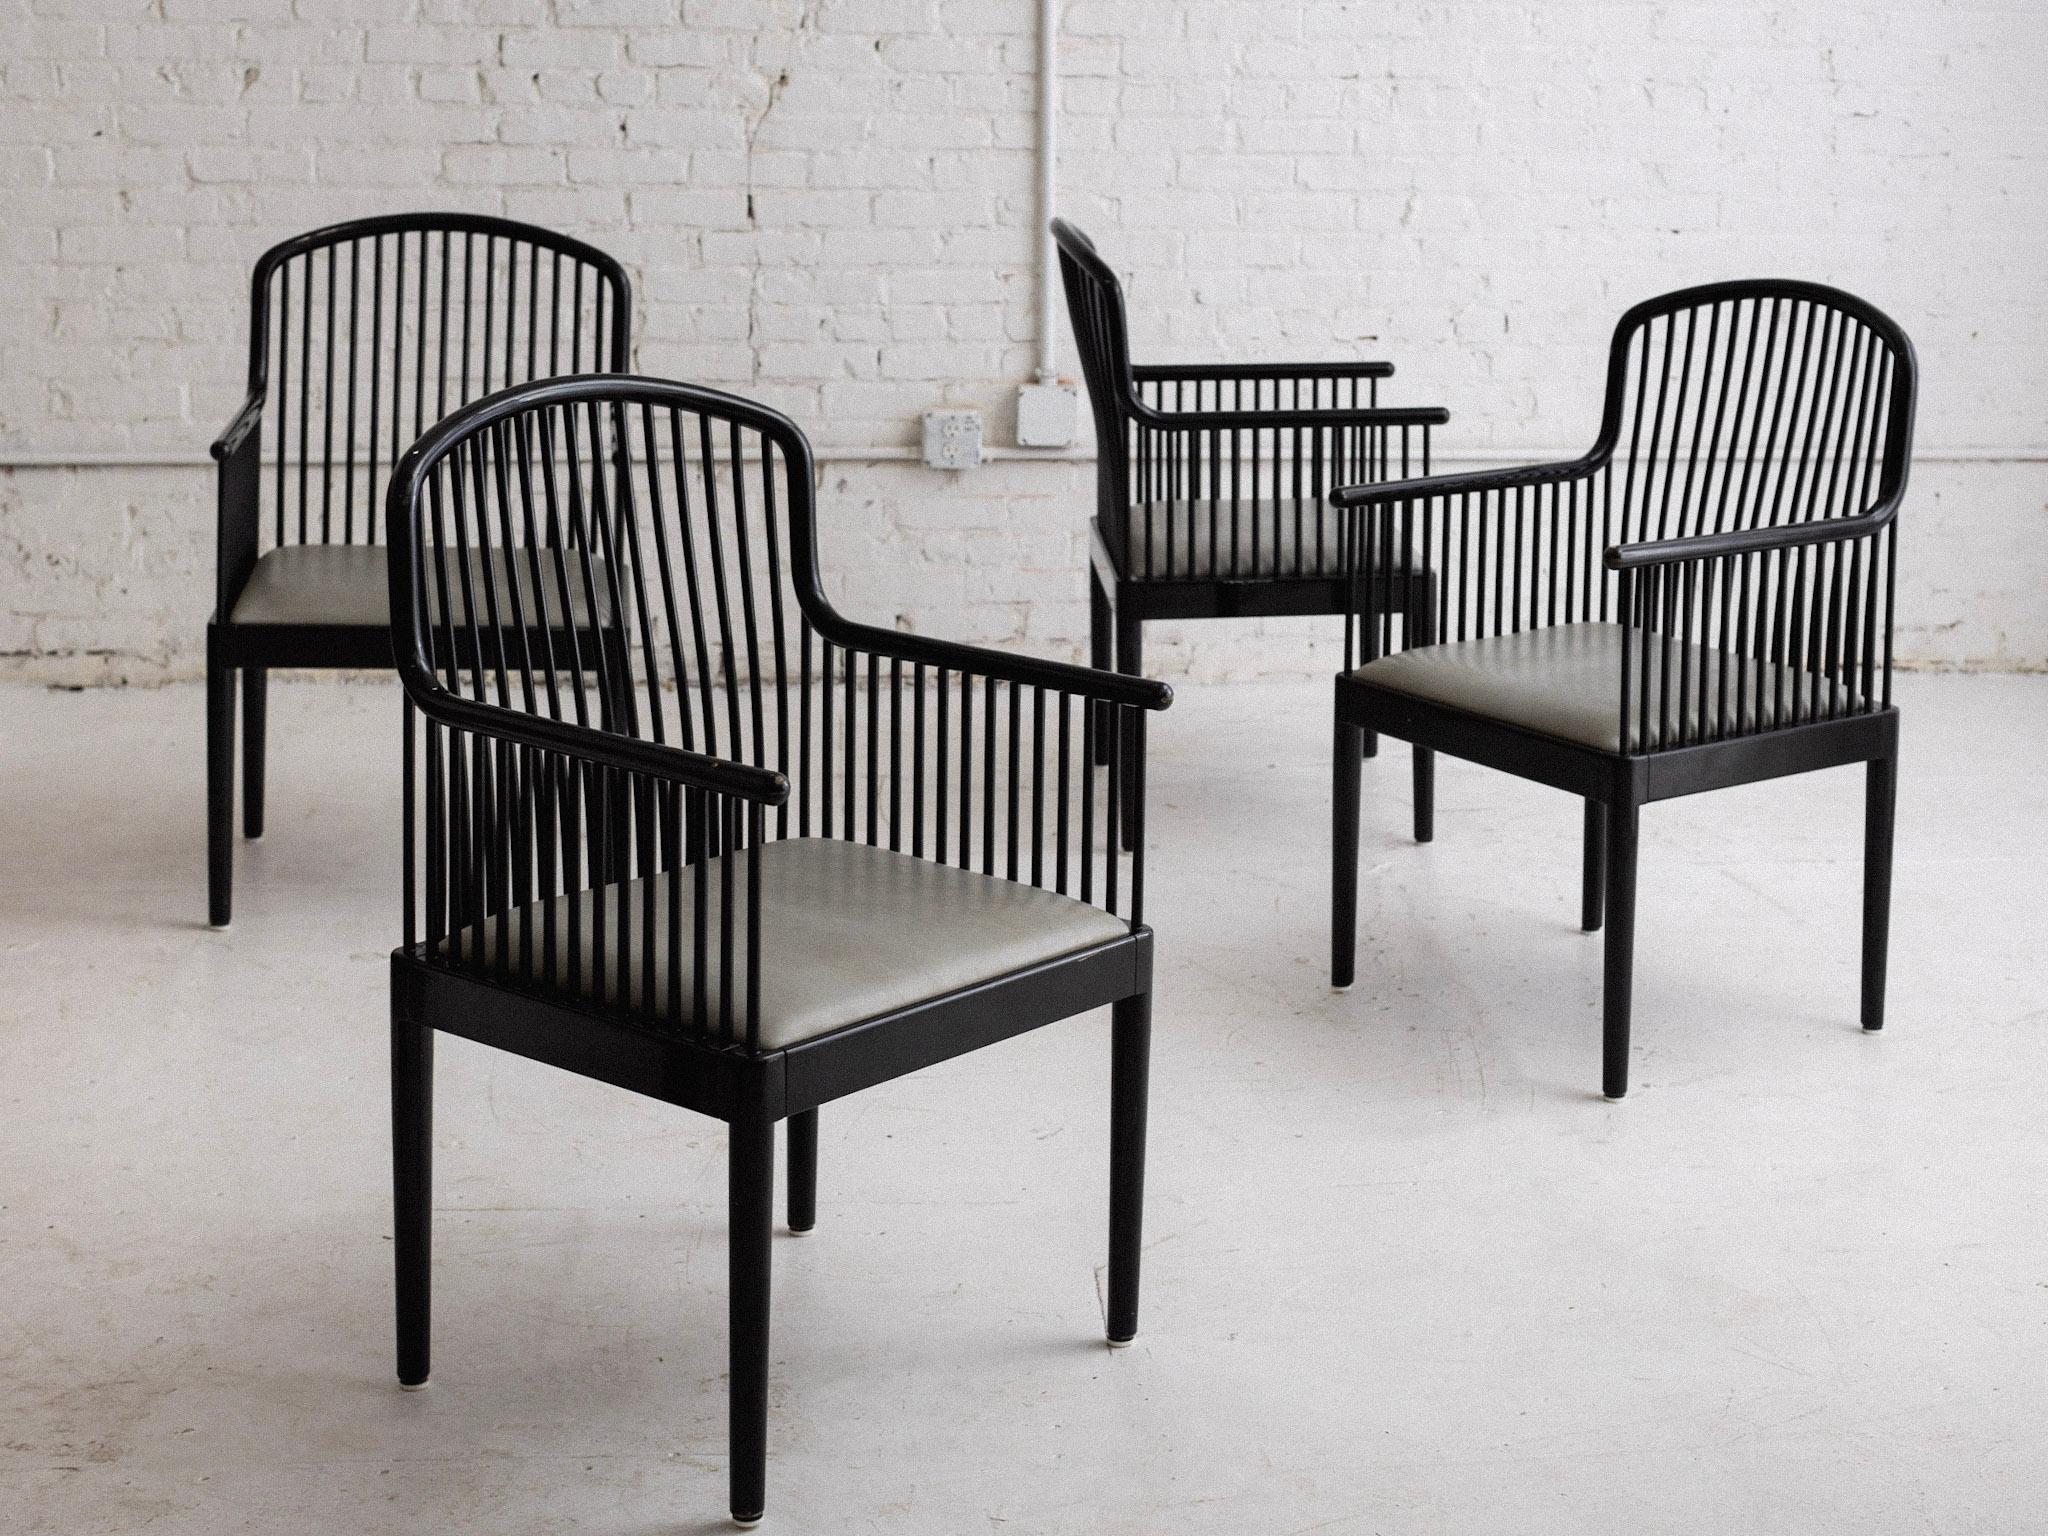 A set of four “Andover” chairs by Davis Allen for Stendig. Black lacquer finish and gray vinyl seats. Retains original “Stendig” and “Collaudo” tags.